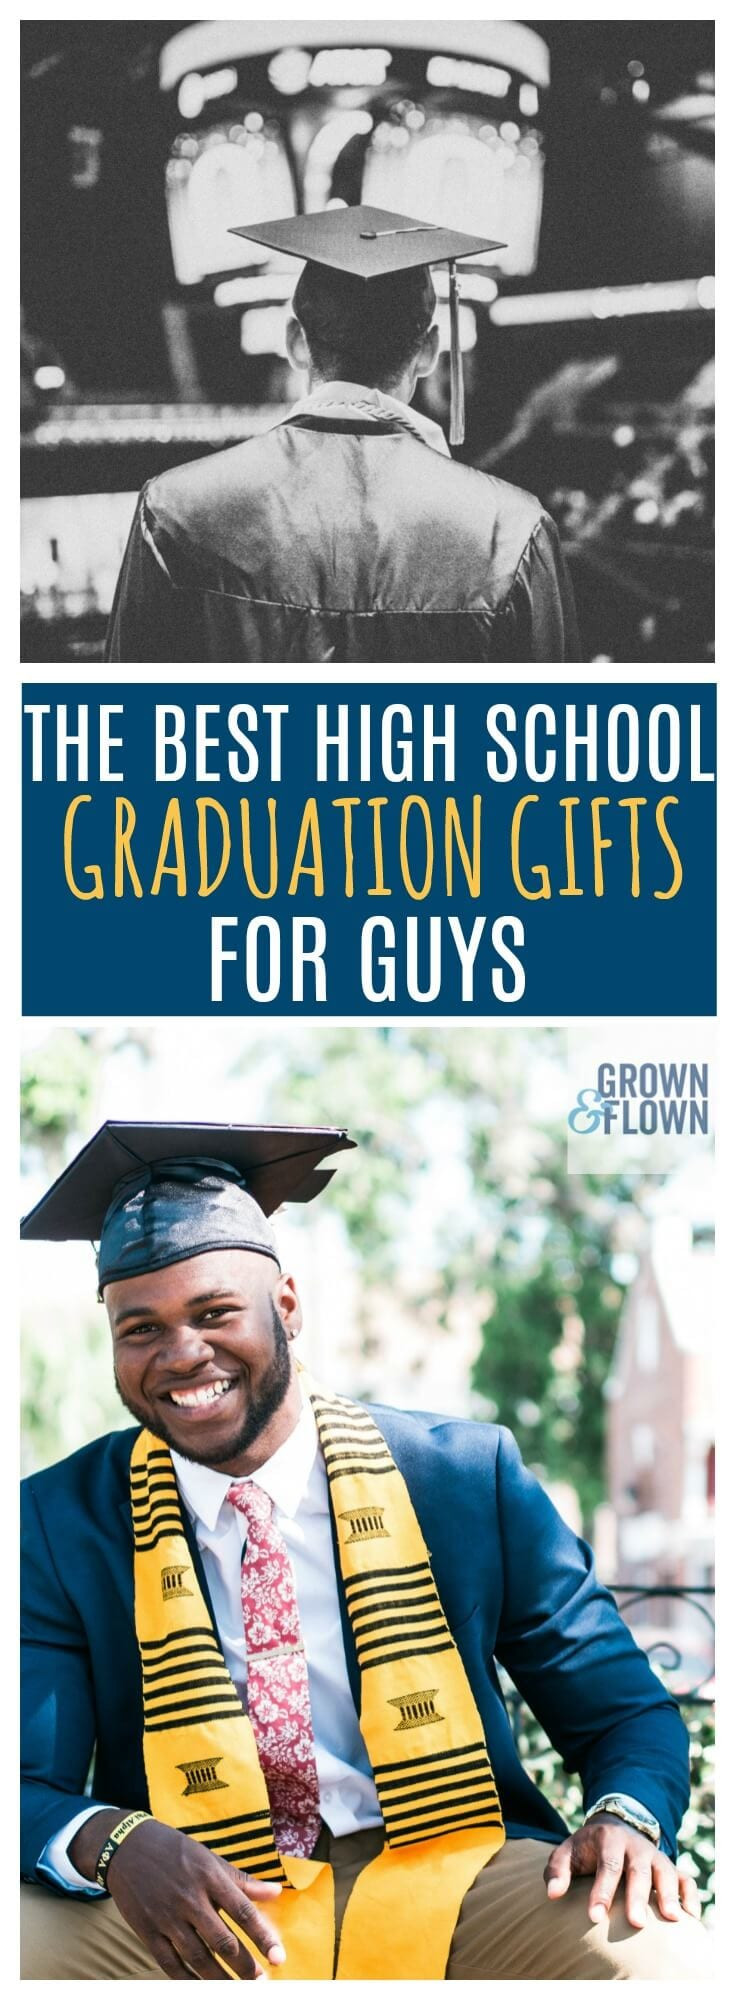 High School Graduation Gift Ideas
 2020 High School Graduation Gifts for Guys They Will Love